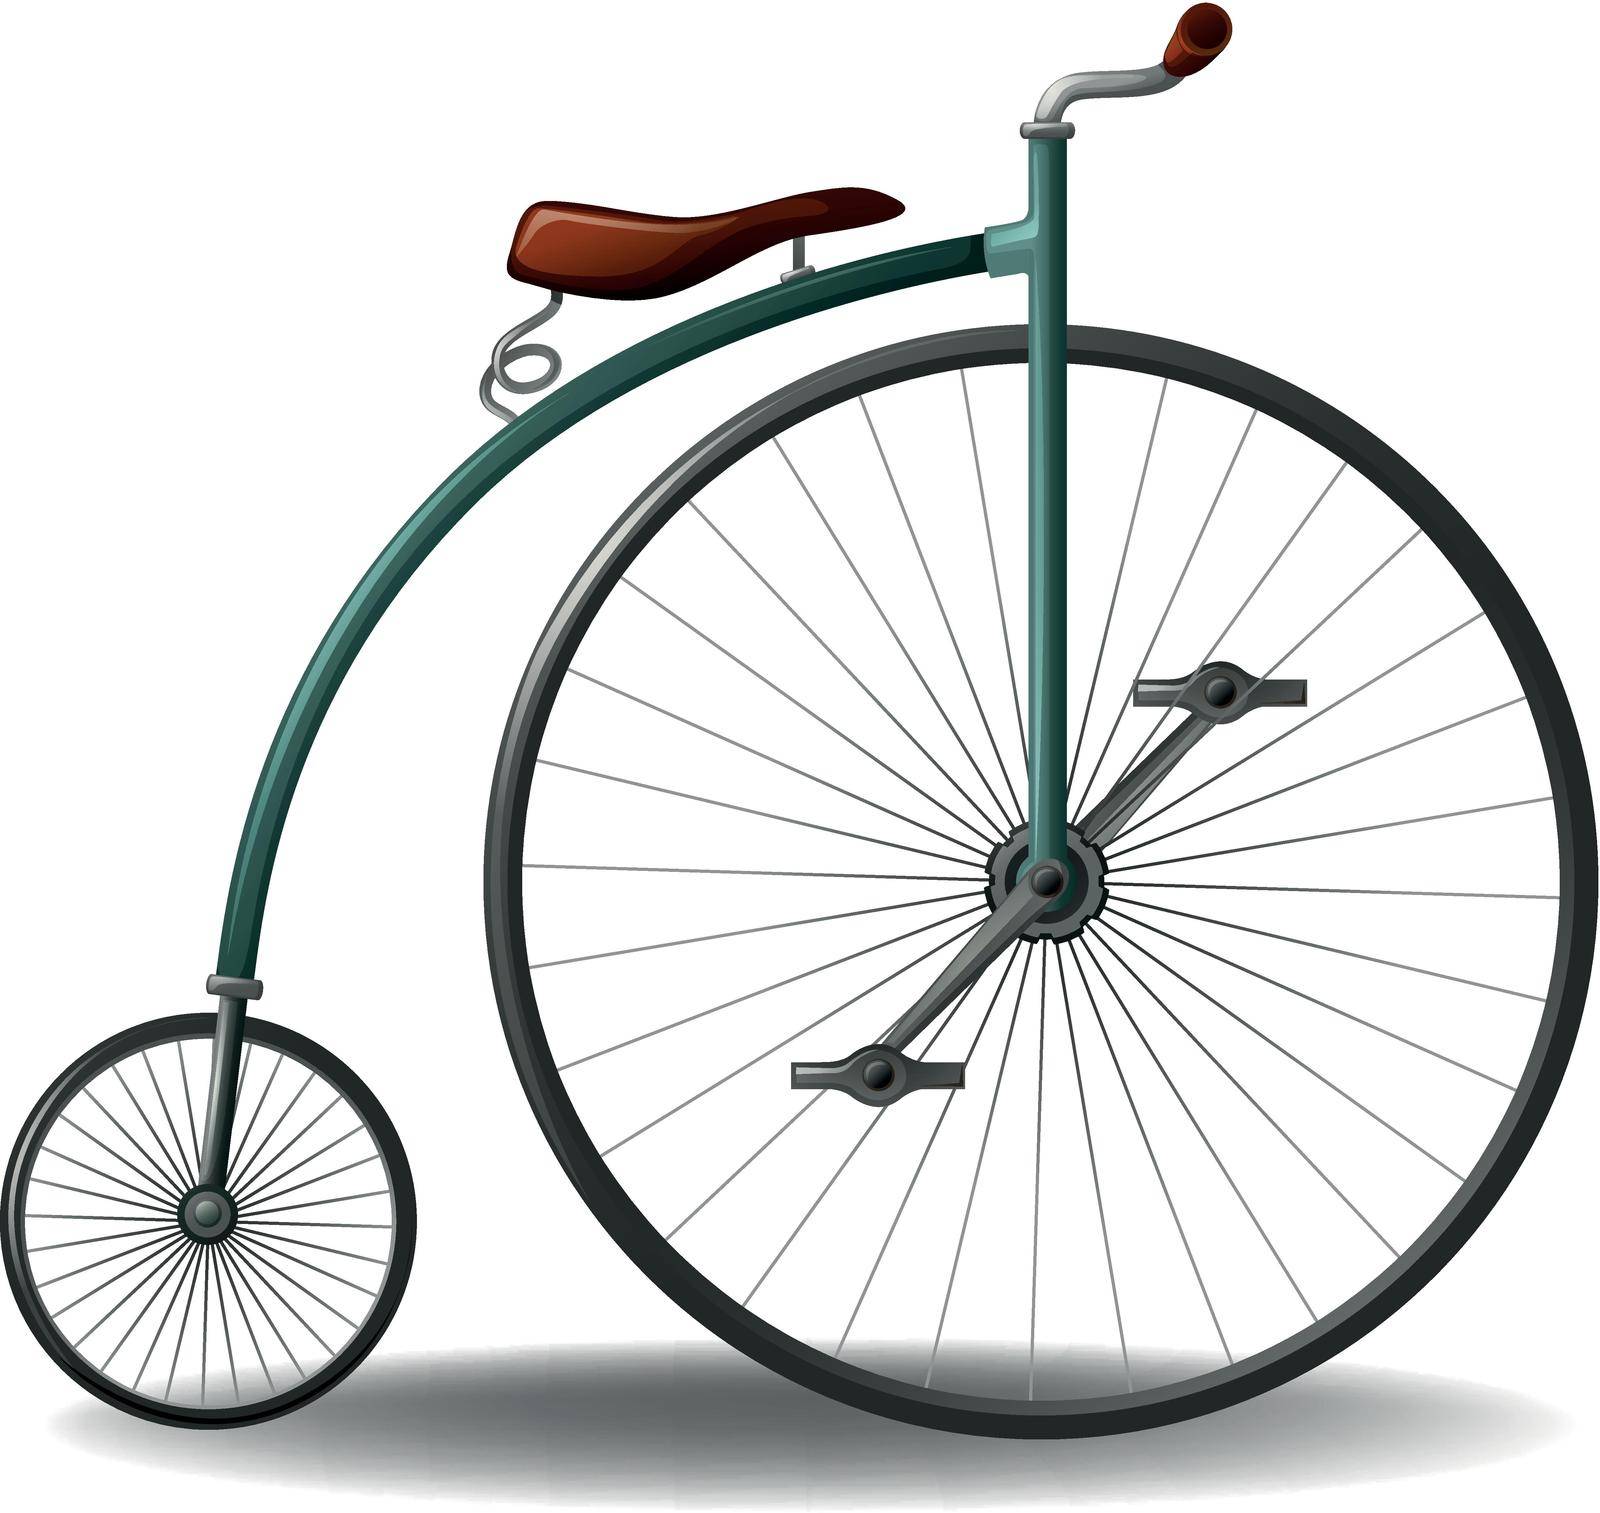 Retro style bicycle on whitte background